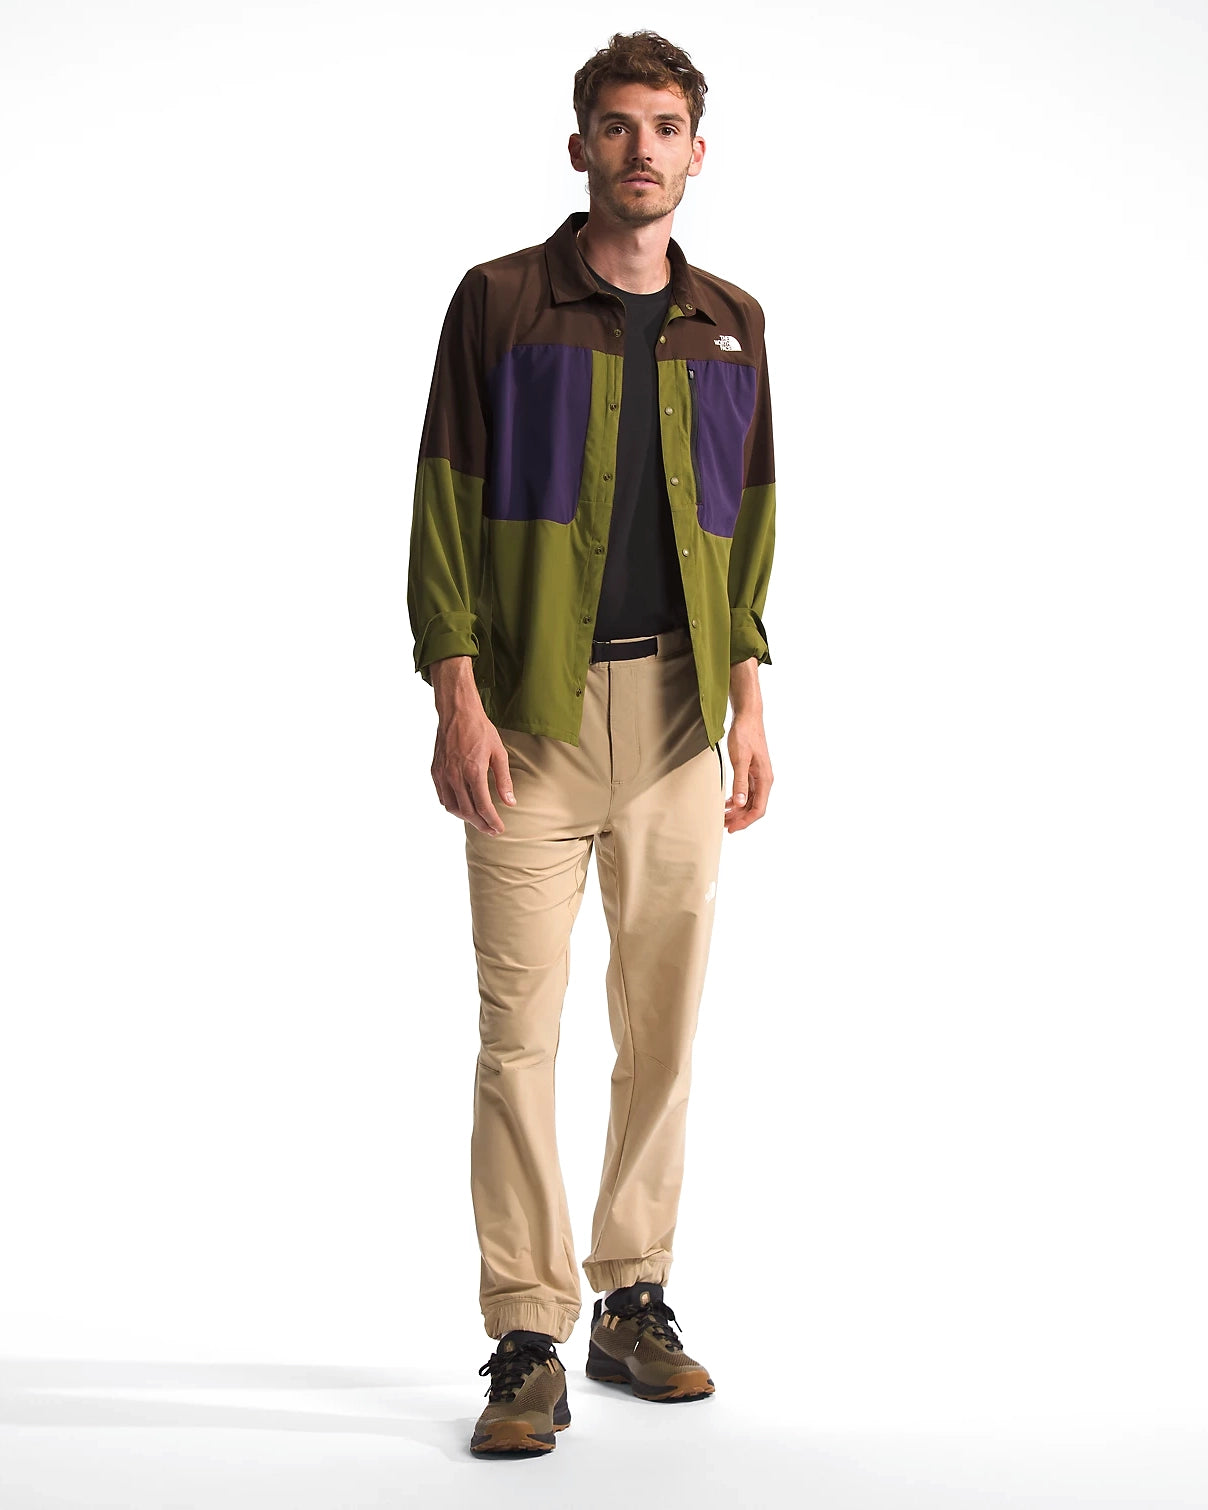 Men’s First Trail UPF Long-Sleeve Shirt - Forest Olive/Demitasse Brown/Black Currant Purple